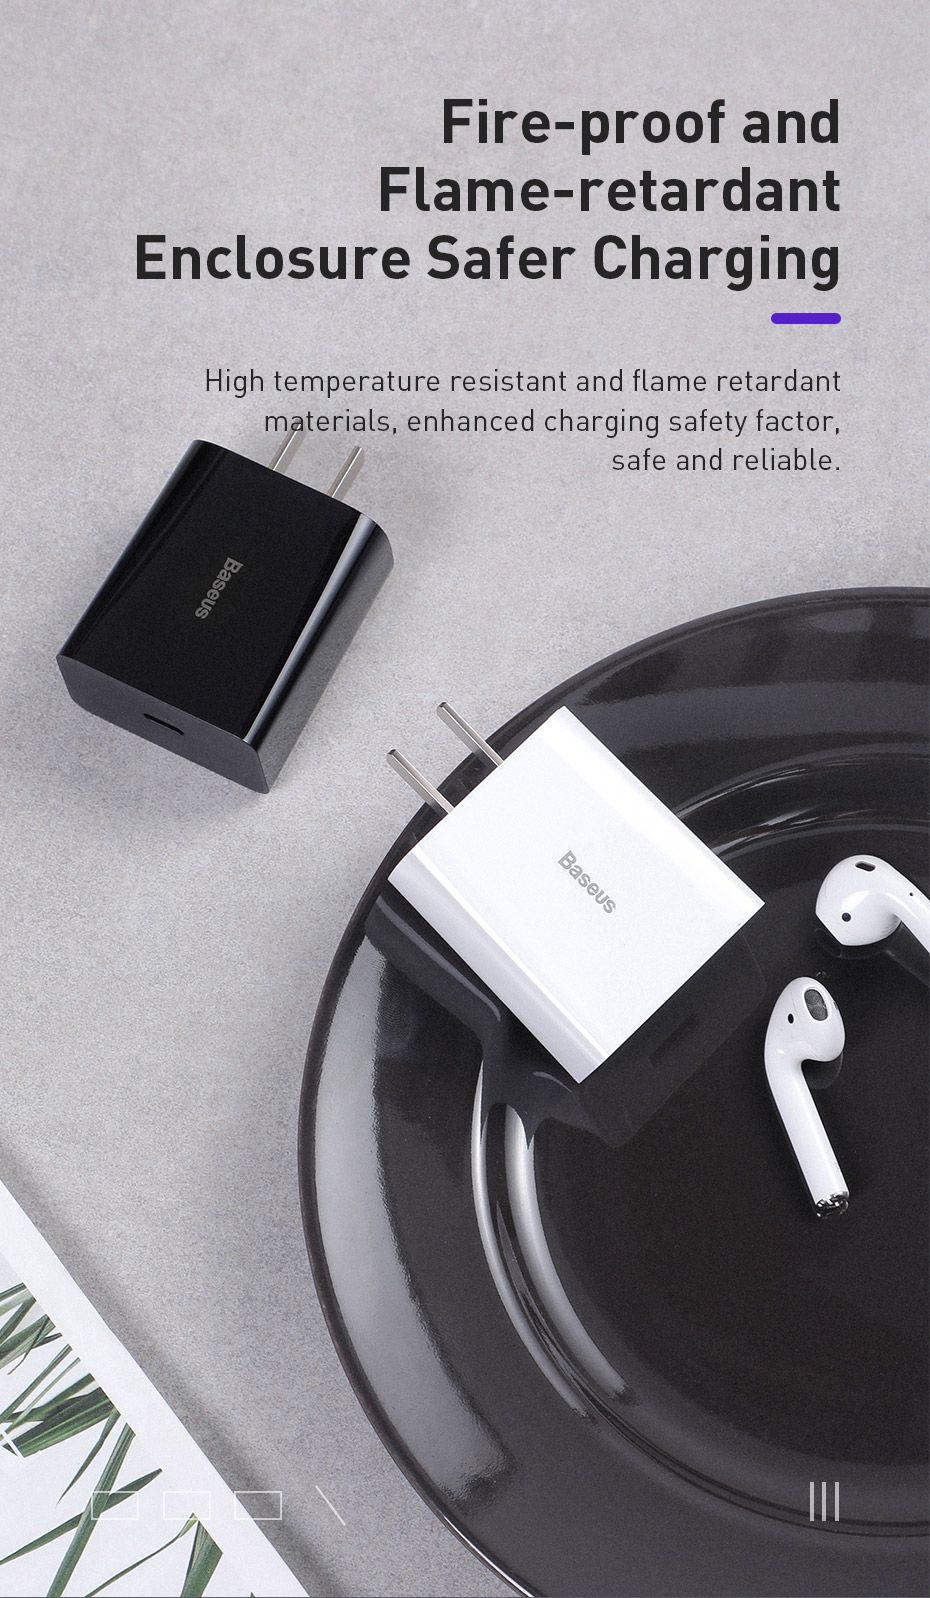 Baseus-18W-QC30-Single-USB-Charger-for-iPhone-11-Pro-XR-Huawei-P30-for-Samsung-1609462